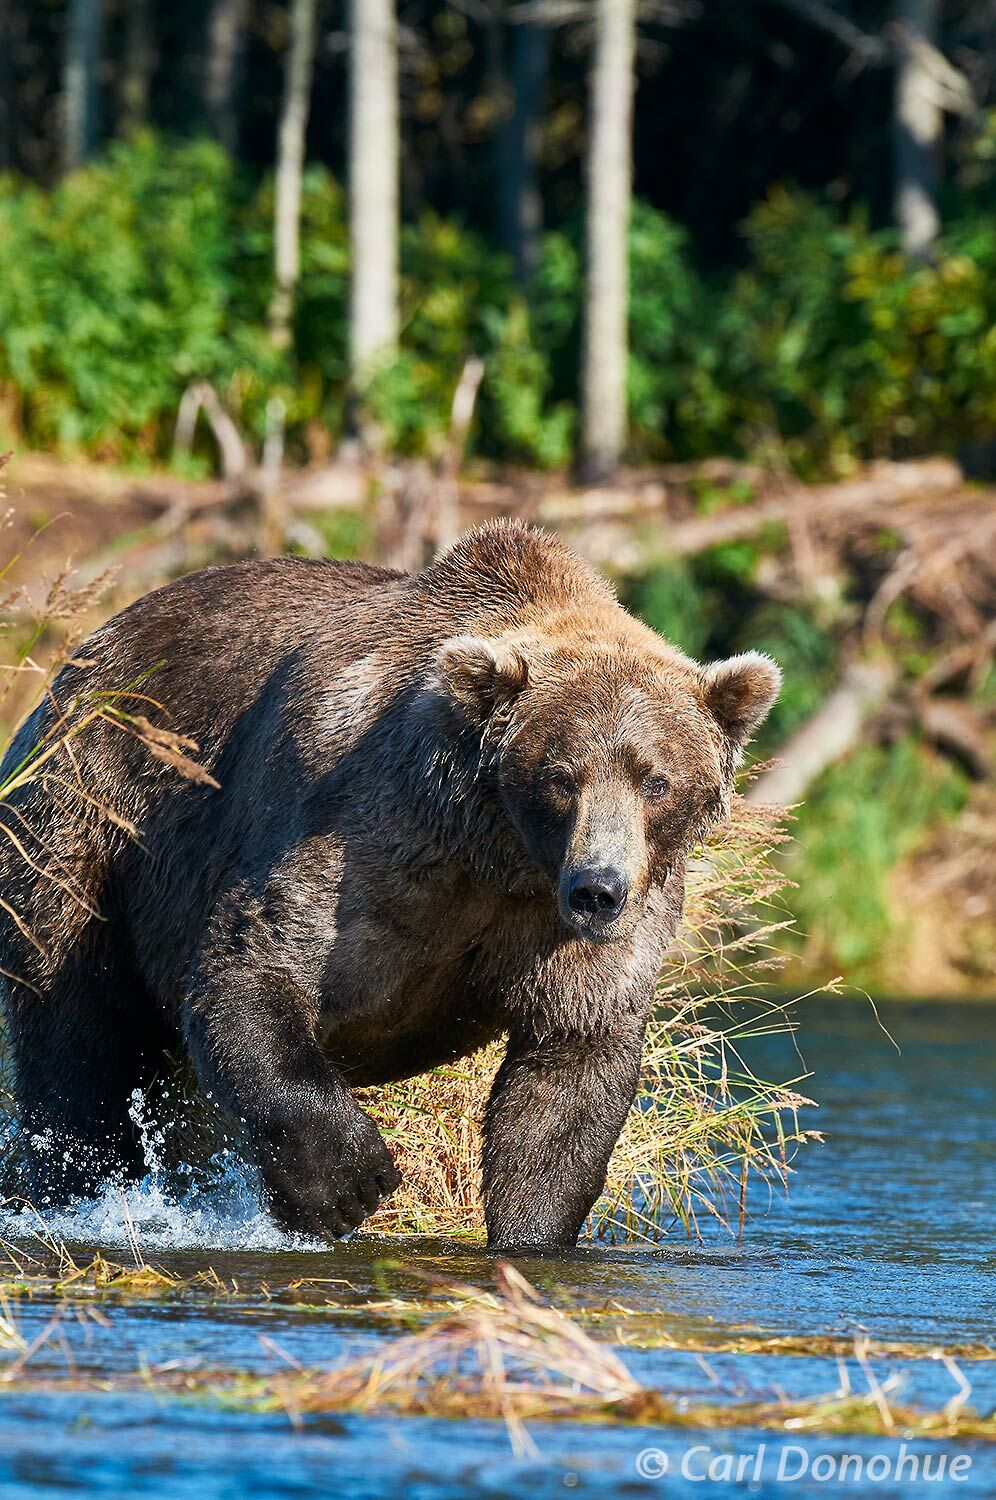 Fans around the world voted (again) for Otis to be Fat Bear of the Year, winner of Fat Bear Week on Brooks River in Katmai National Park. Otis is a longtime fav